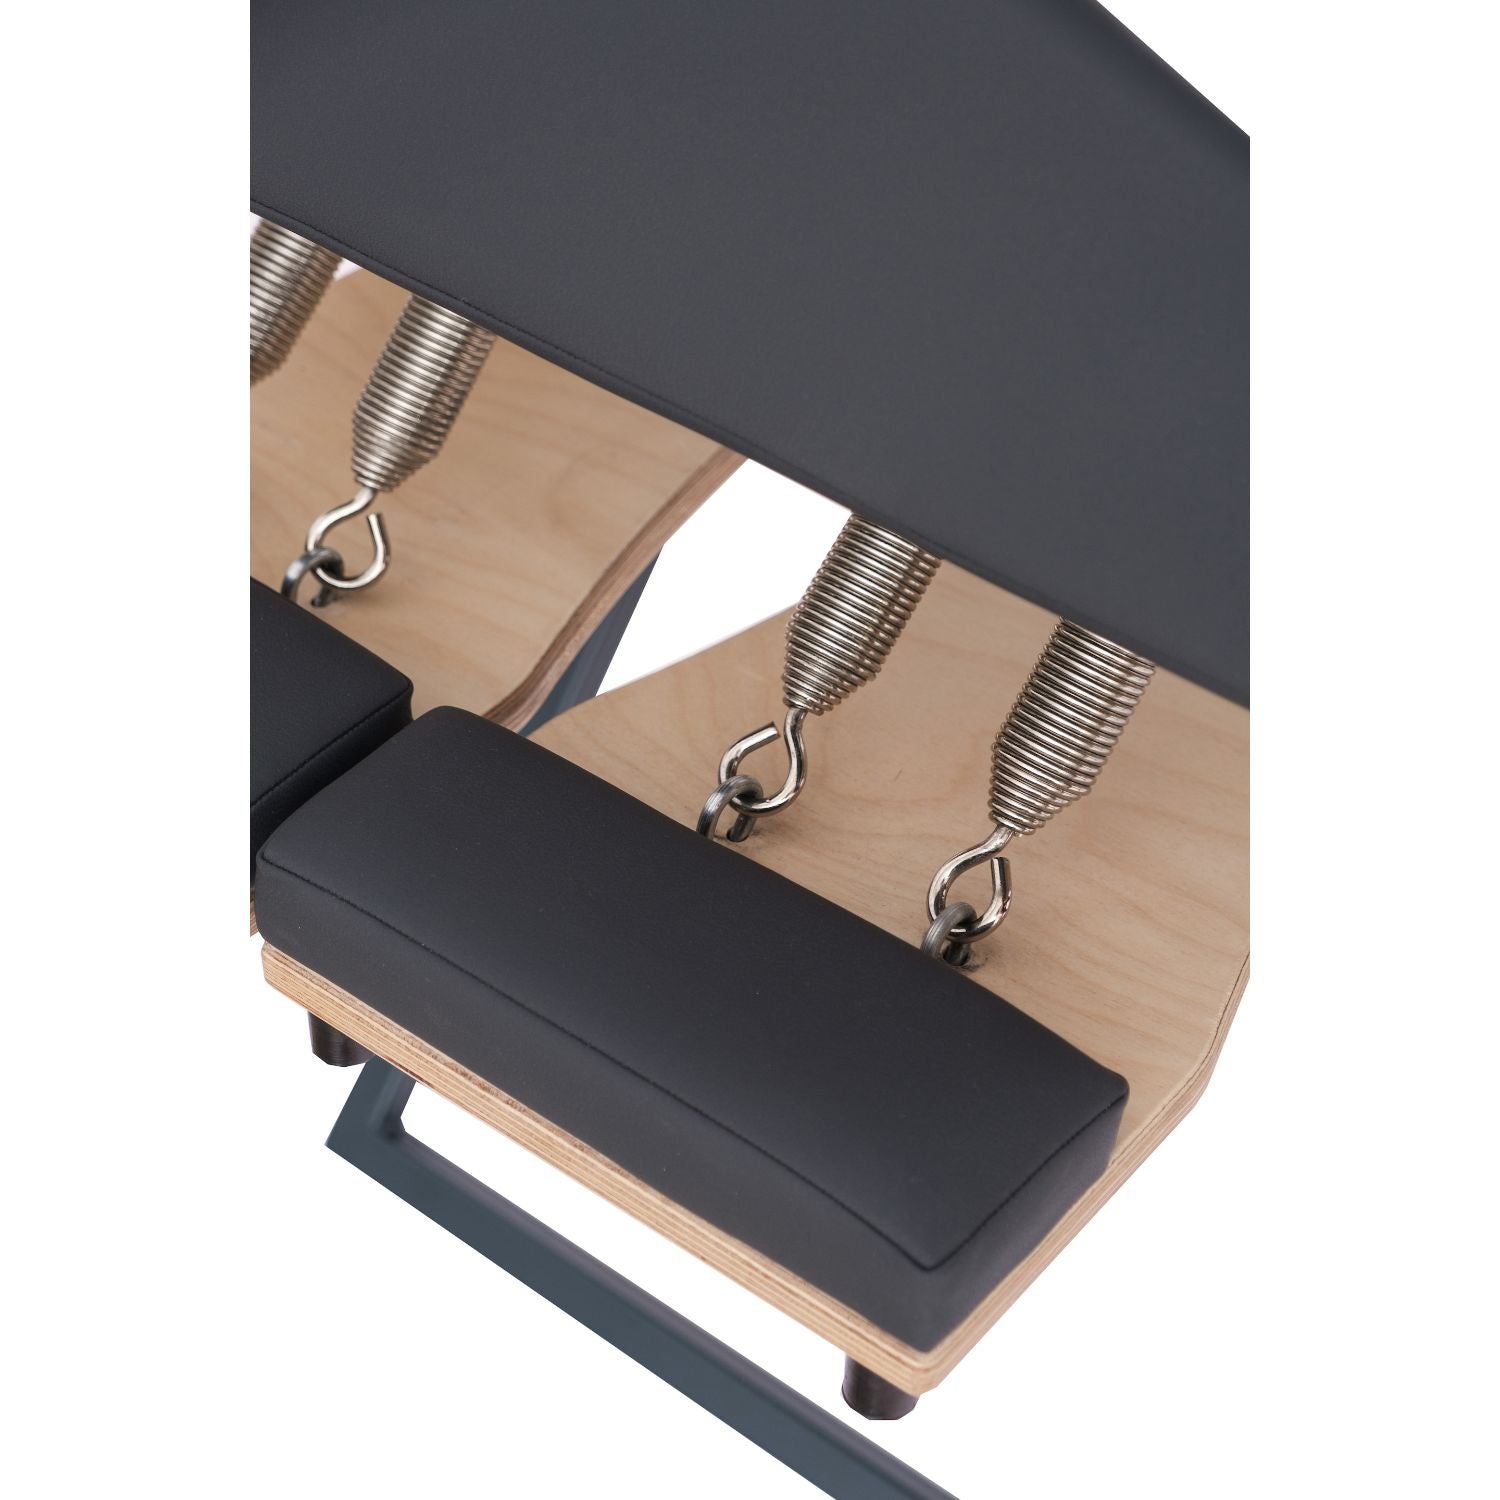 Fitkon Wunda Chair For The Lowest Price with Free Shipping